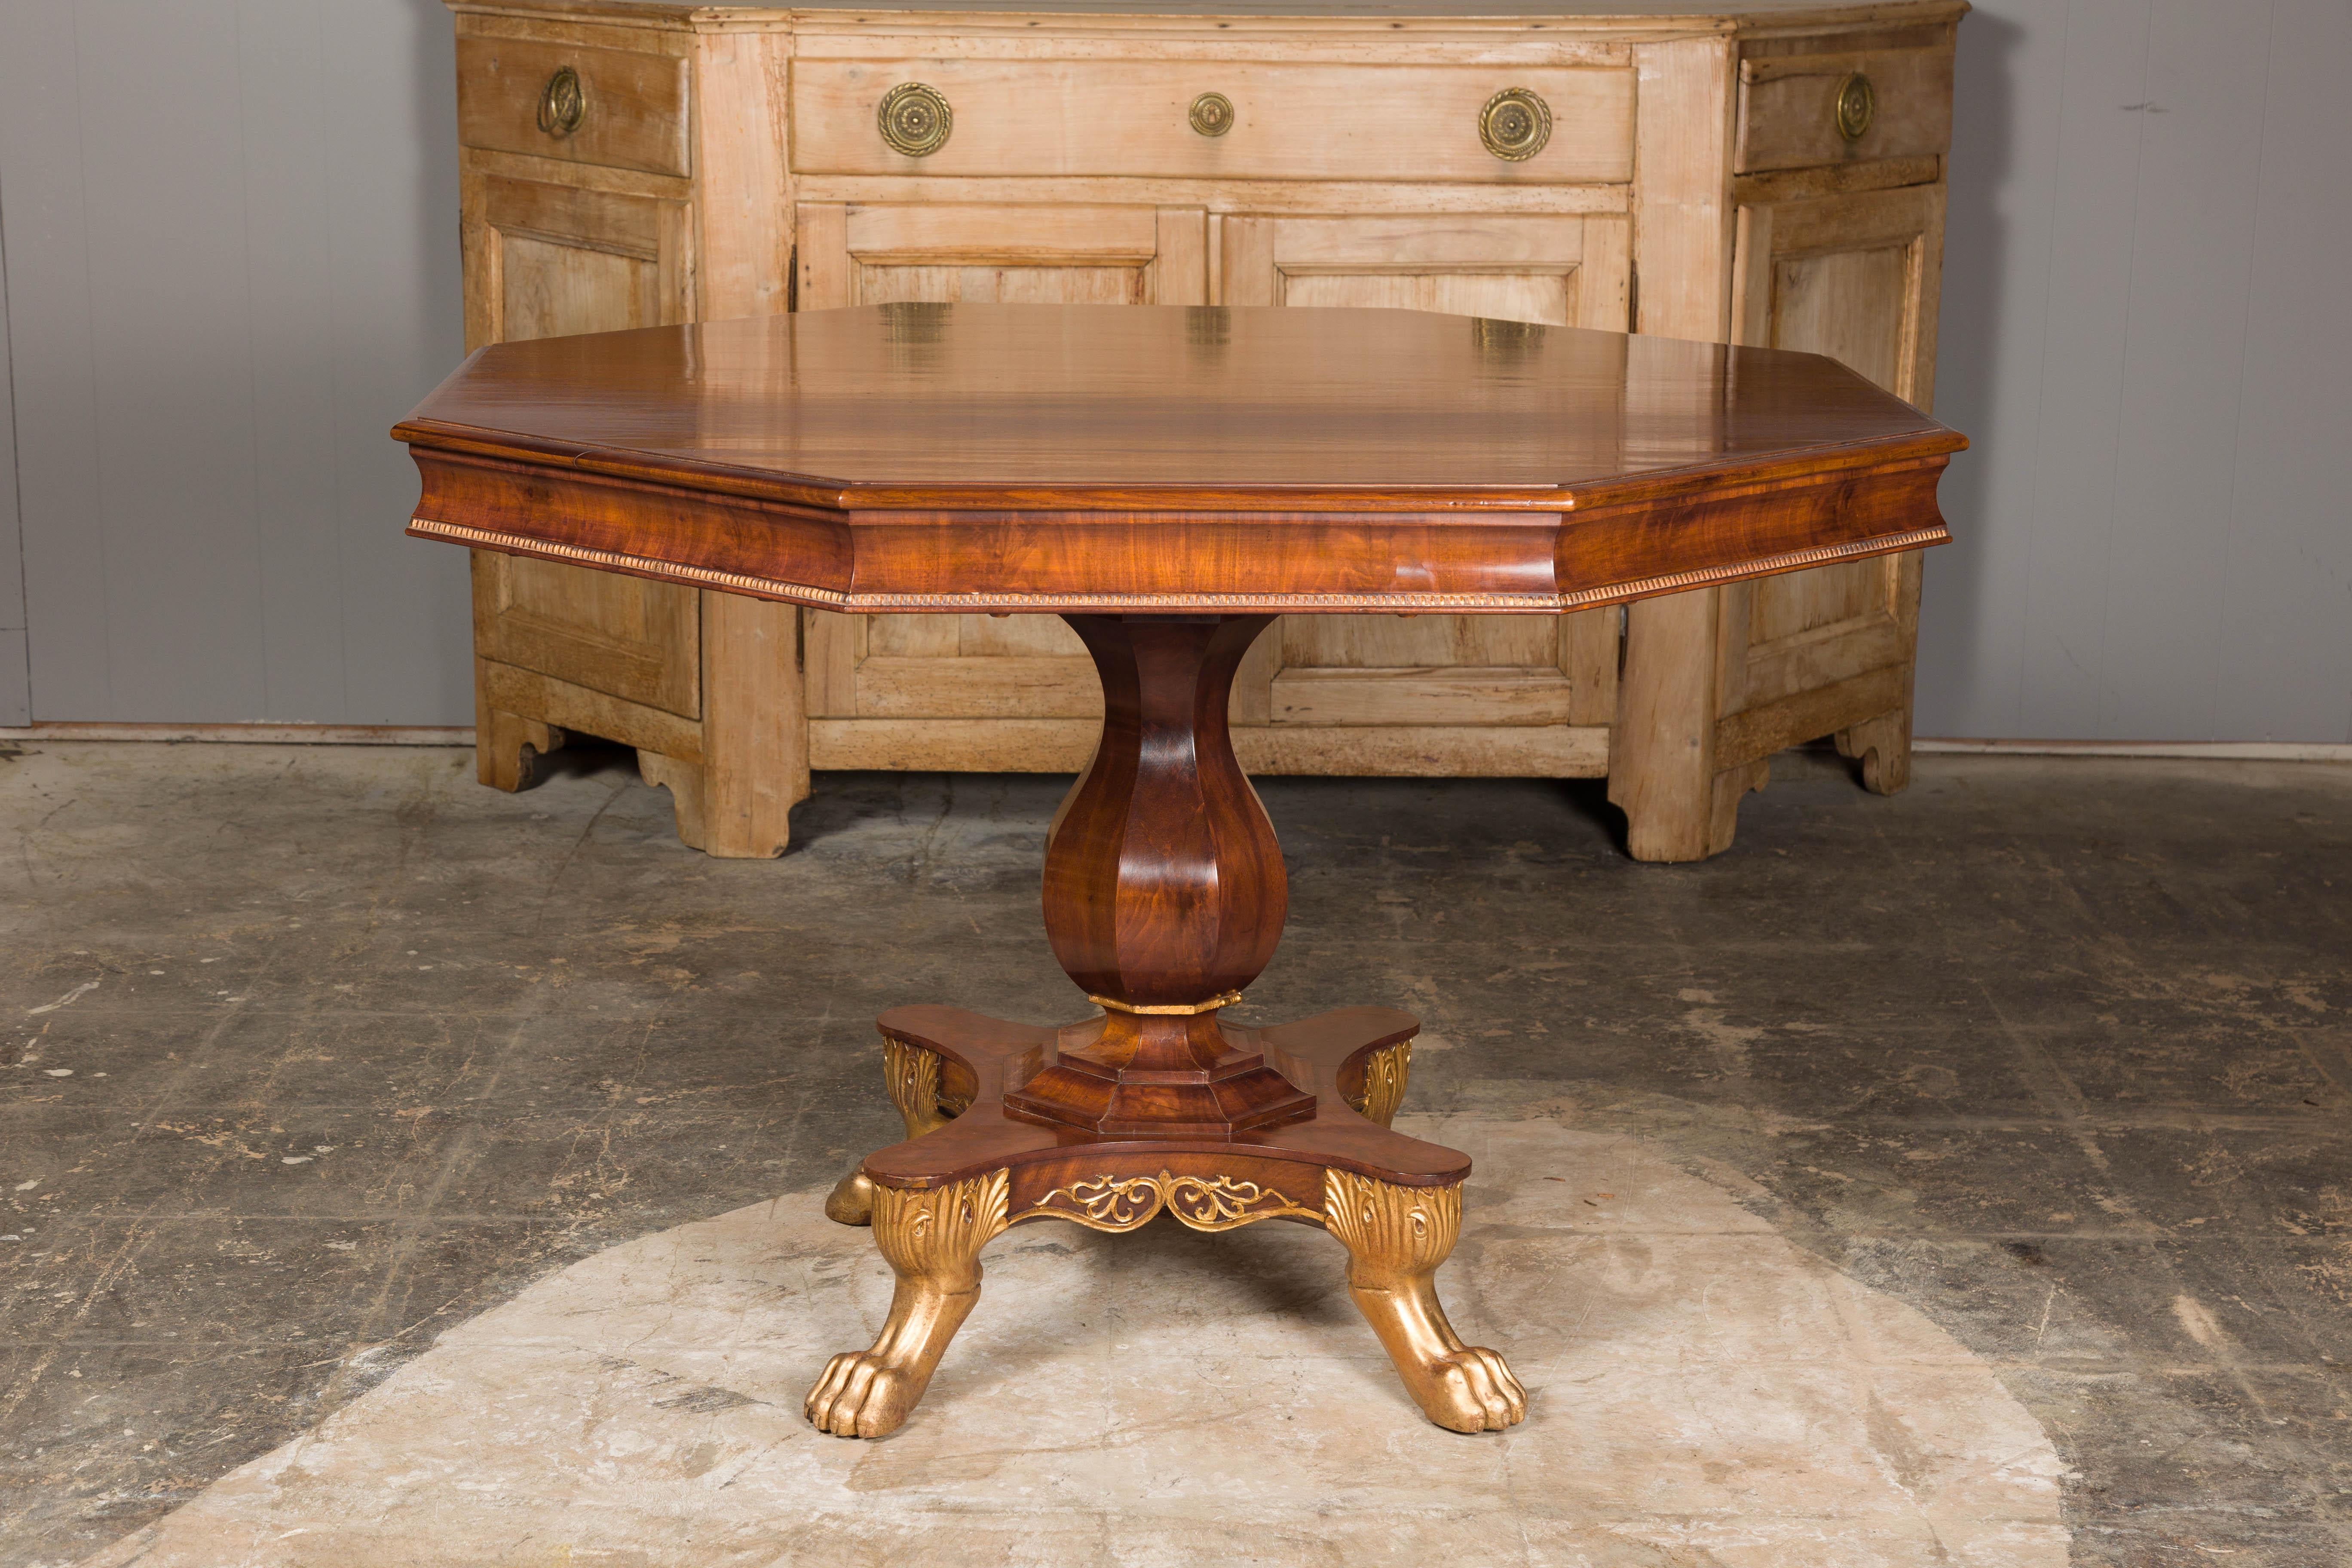 An English Regency period mahogany center table circa 1820 with octagonal top, carved pedestal and gilded lion paw feet. Enveloping the quintessence of the English Regency period, this mahogany center table, circa 1820, is a harmonious blend of